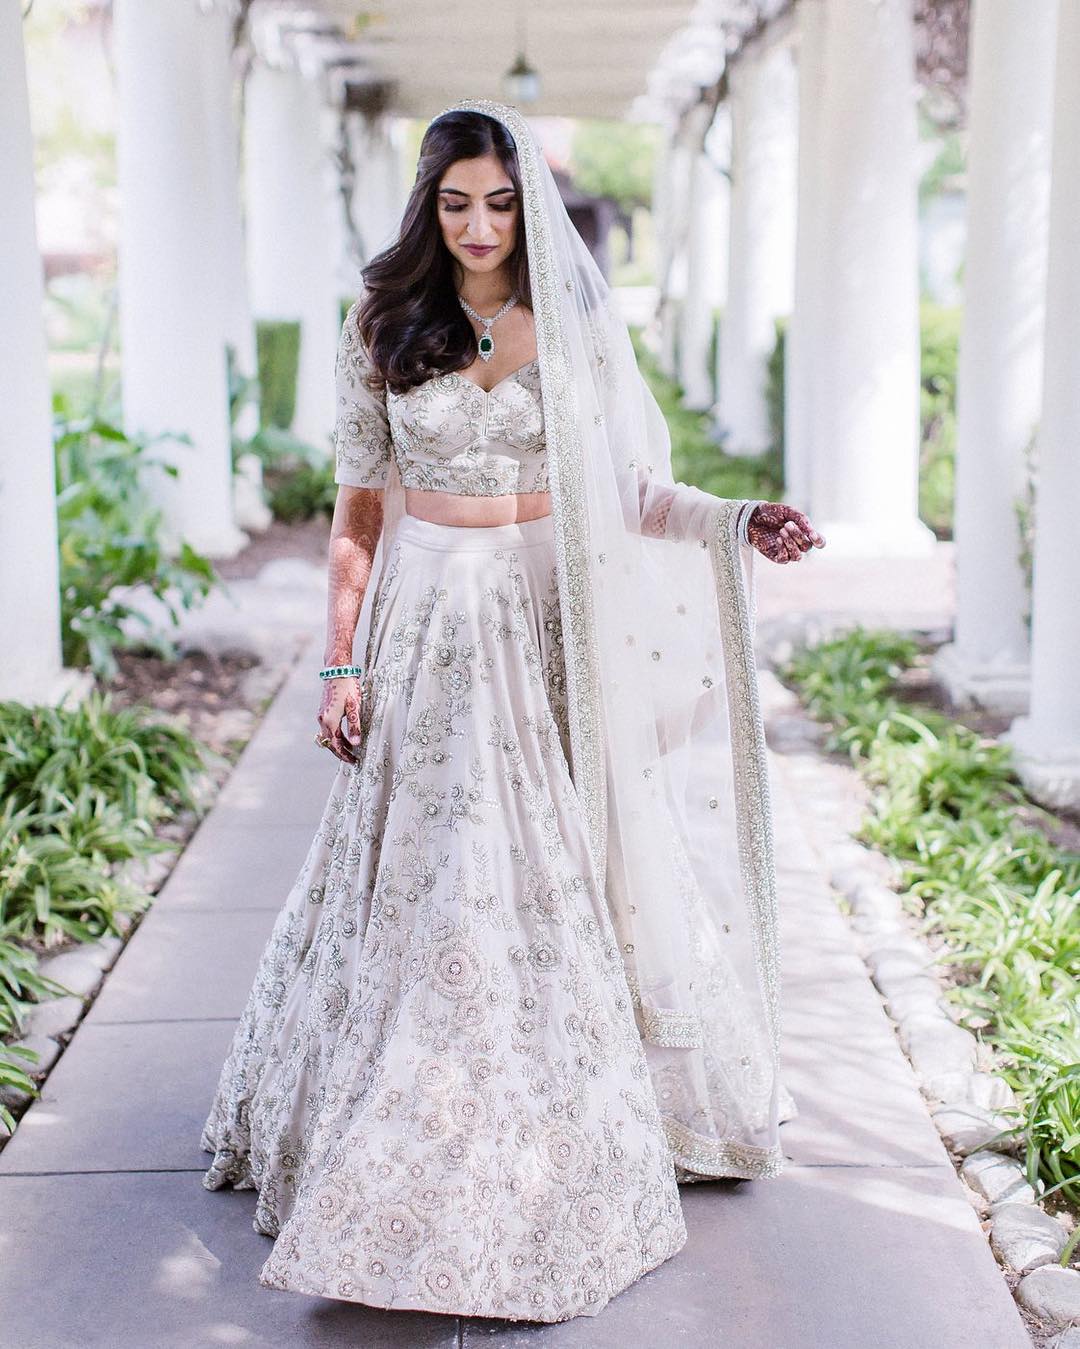 Sabyasachi Just Dropped A Few New Collections Loaded With Bridal Lehengas   WedMeGood